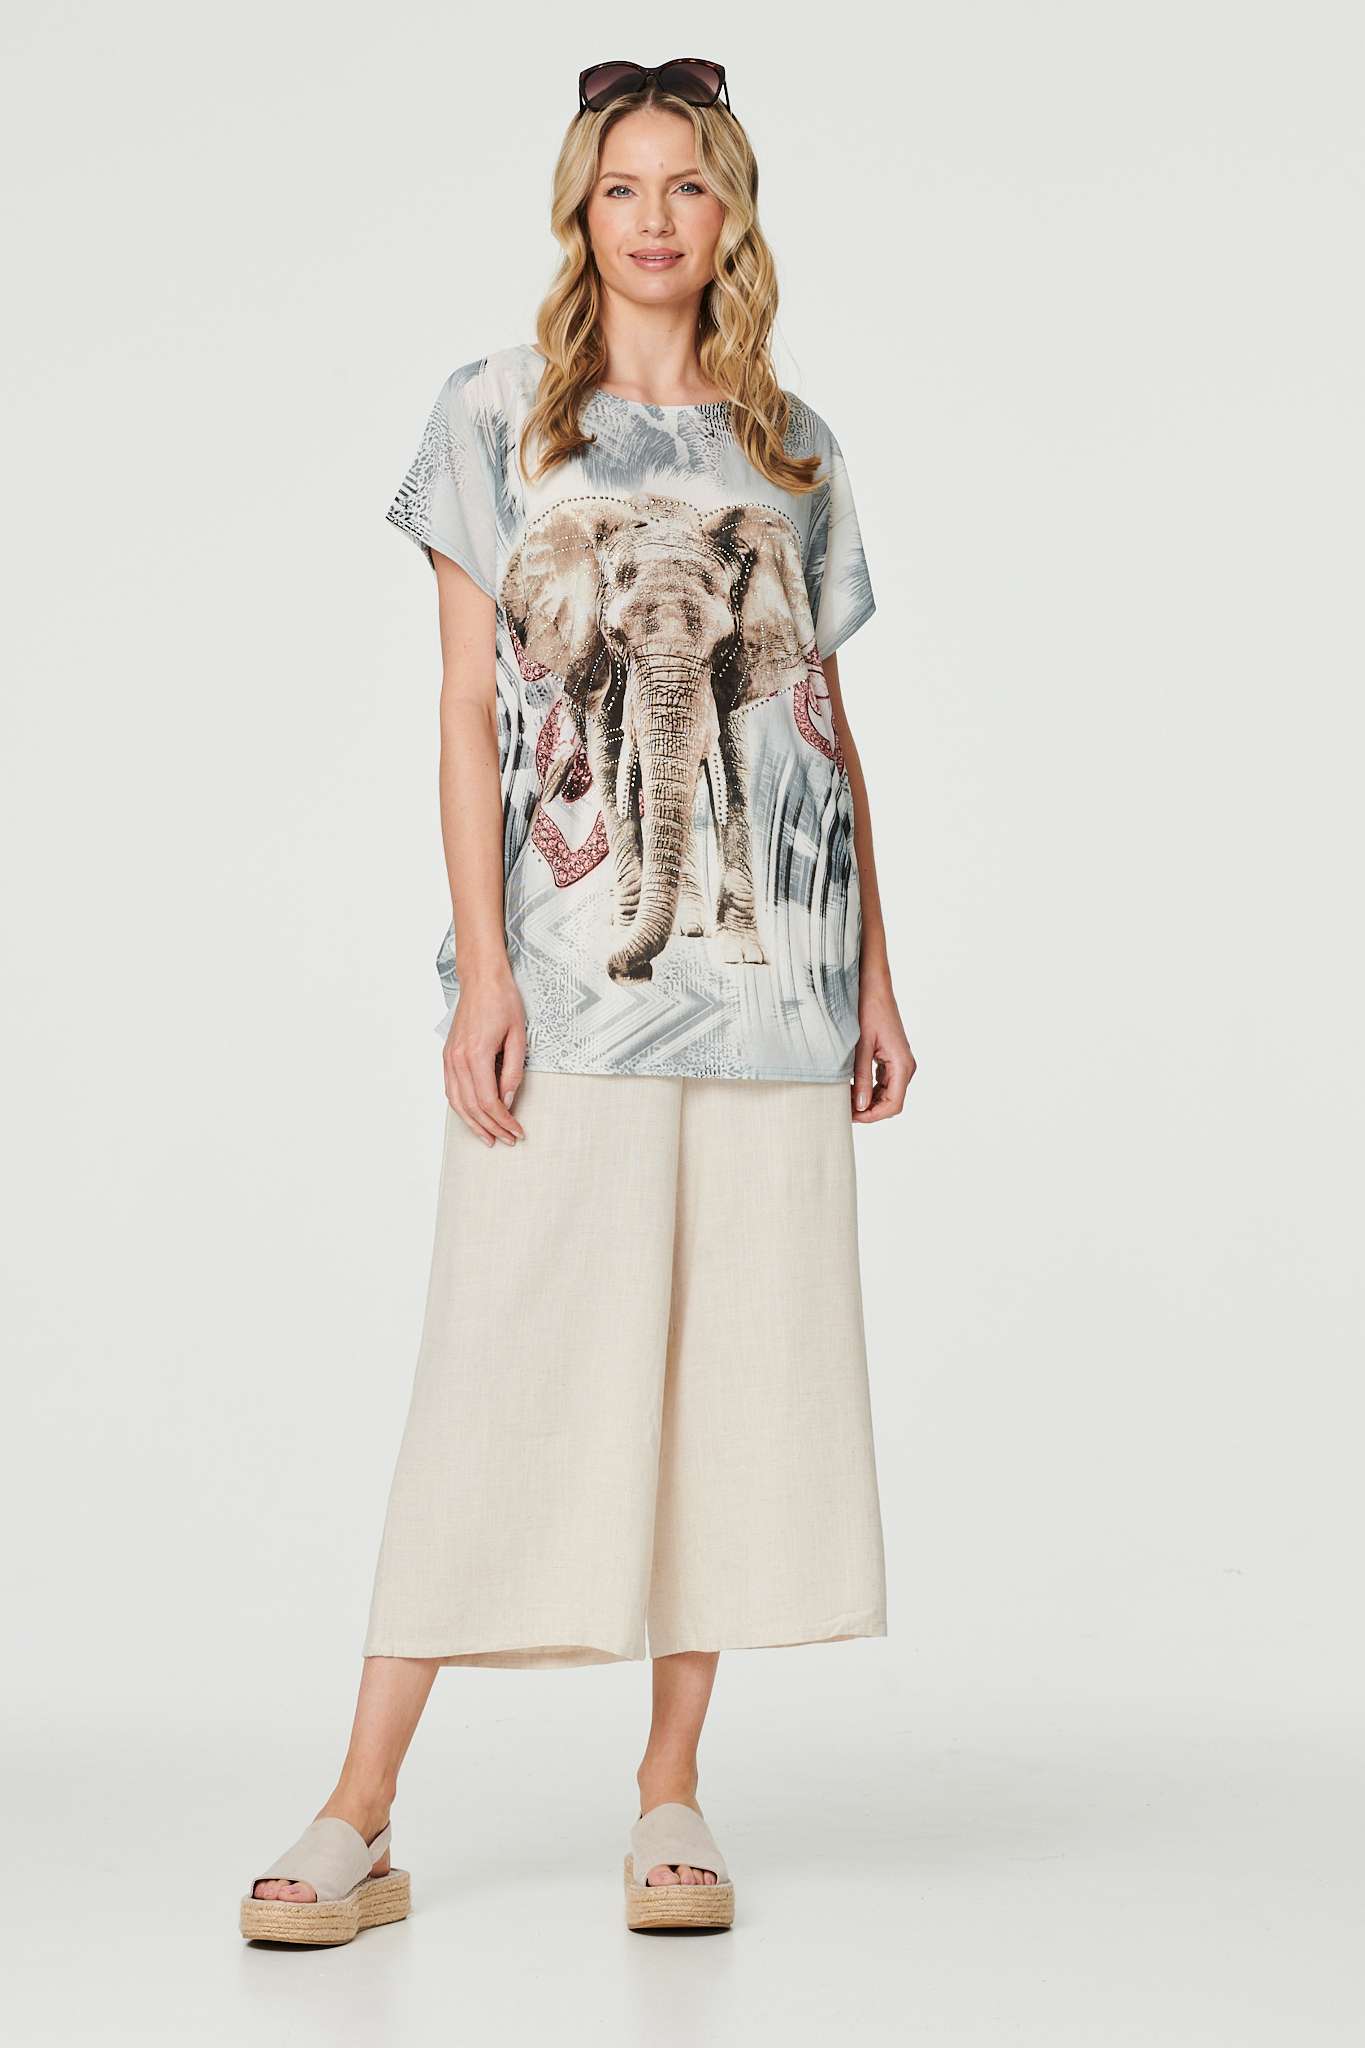 Silver | Embellished Elephant Graphic Top